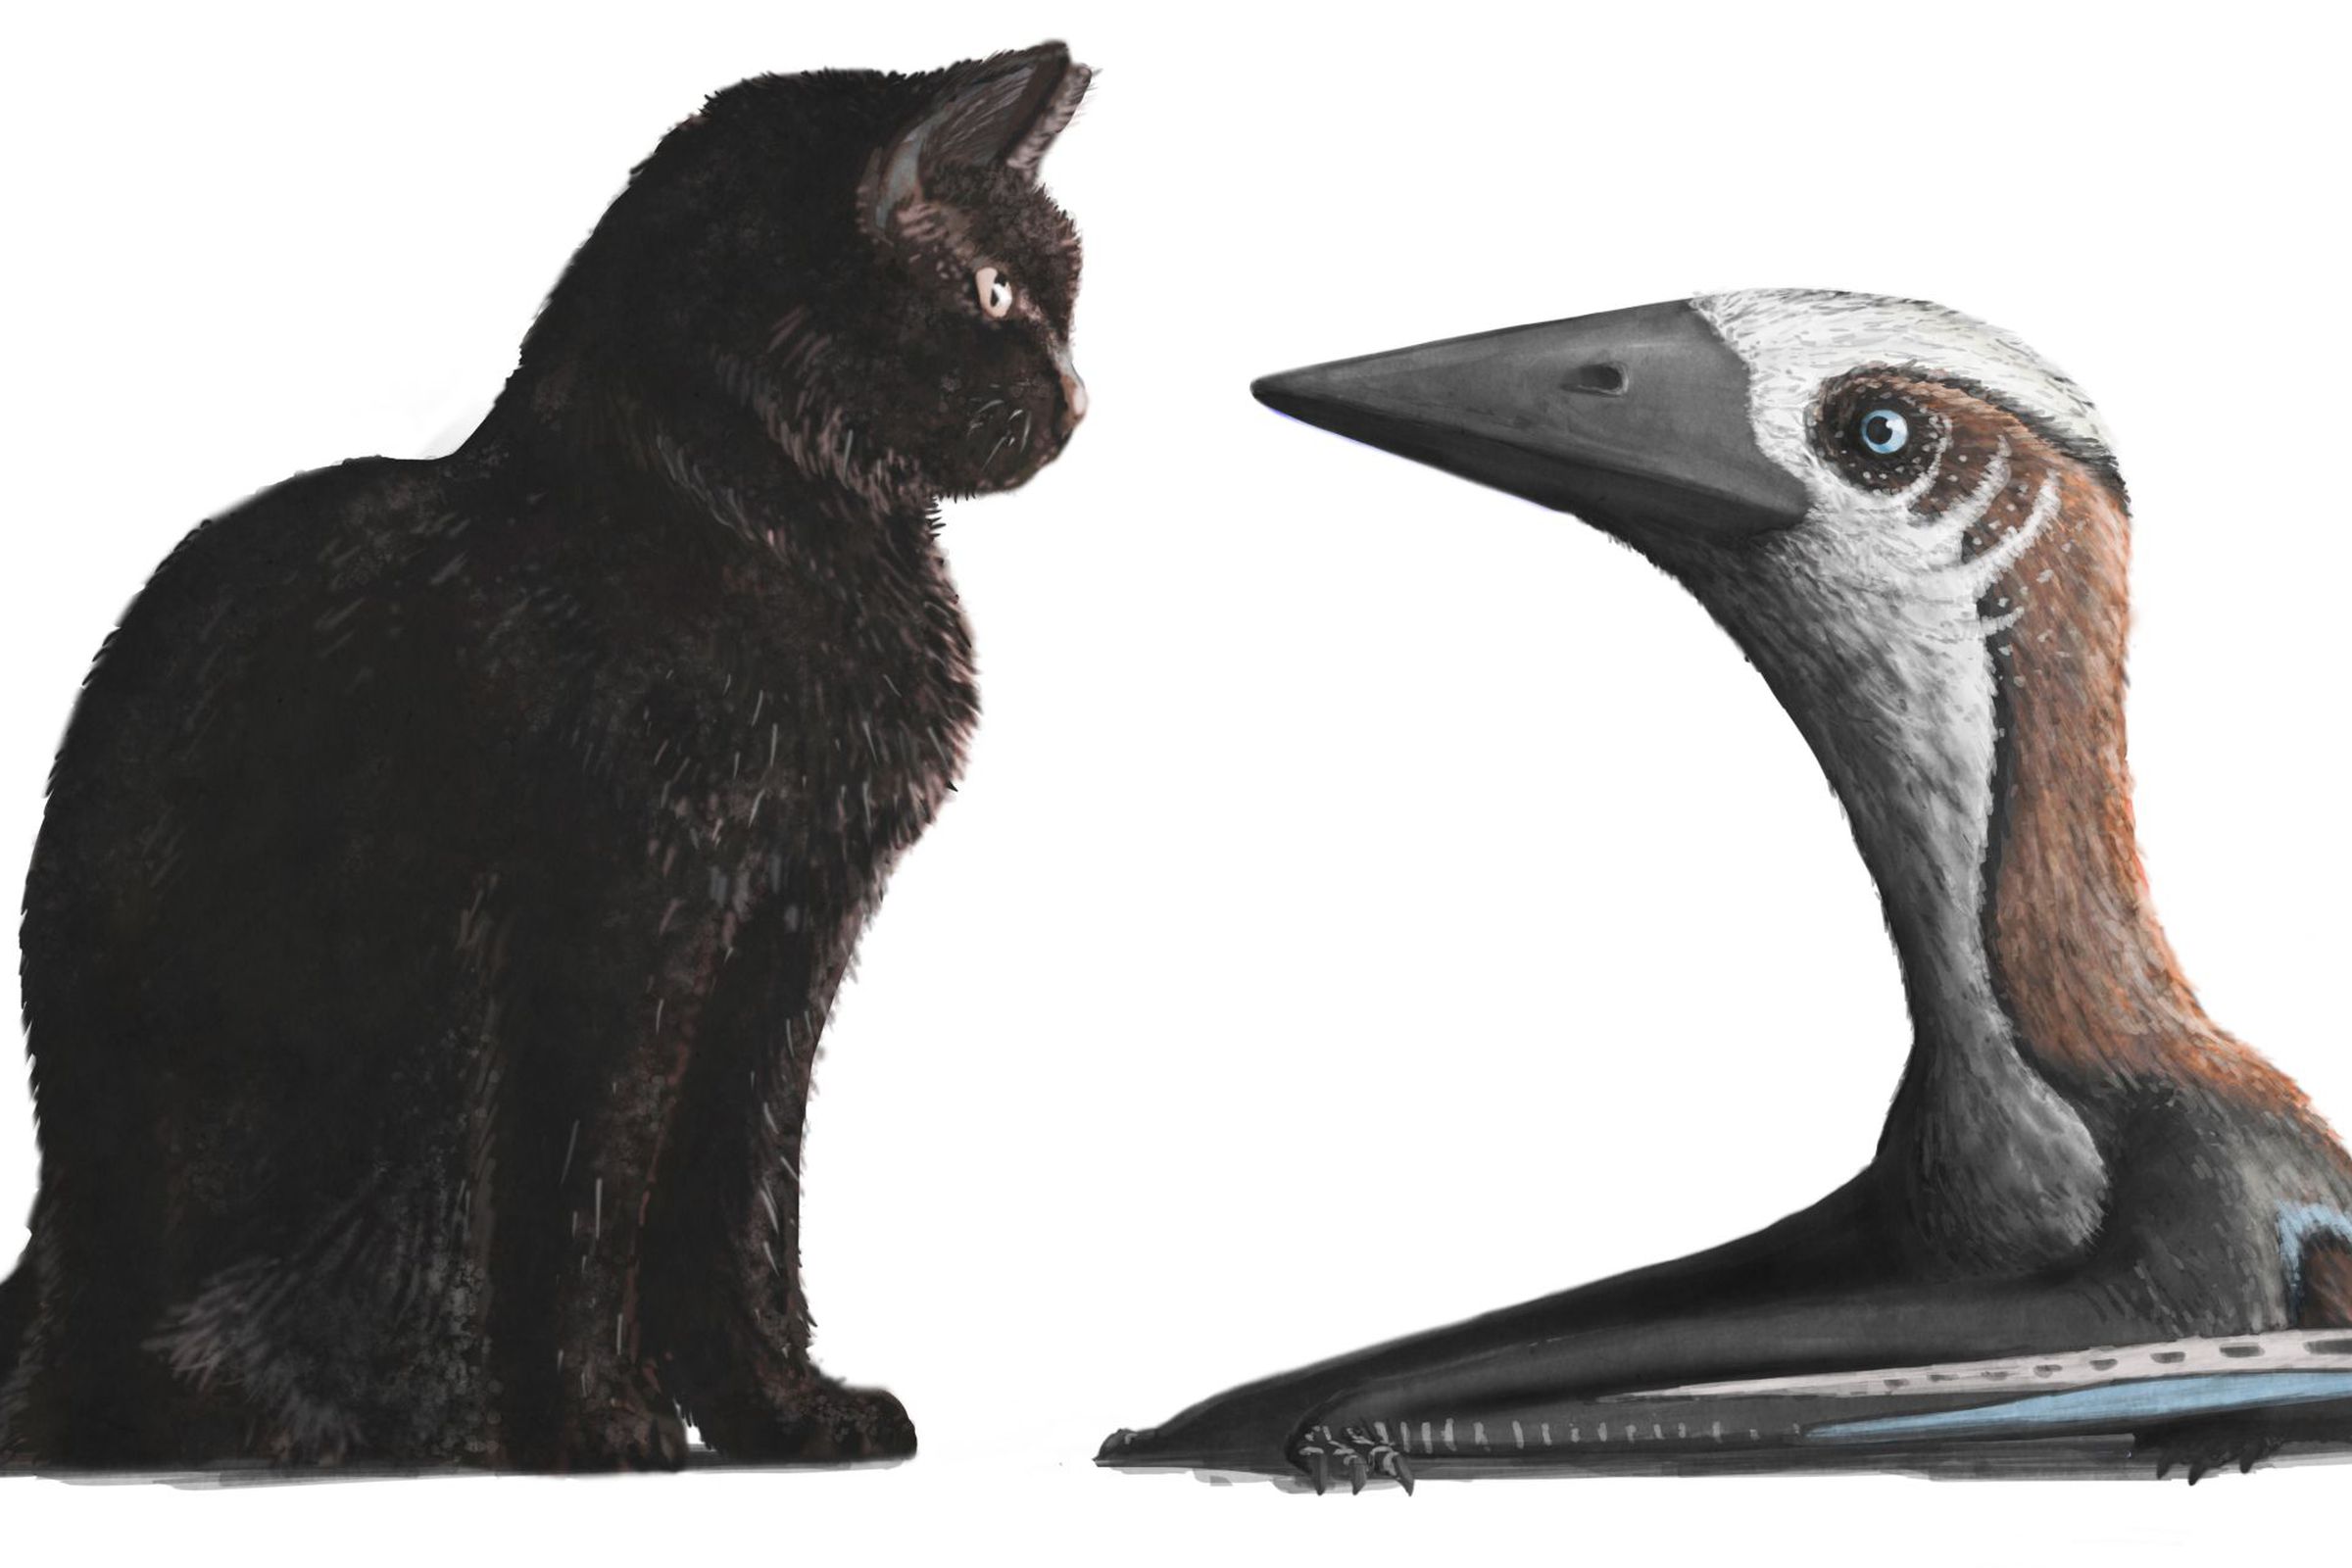 The Hornby pterosaur next to a cat